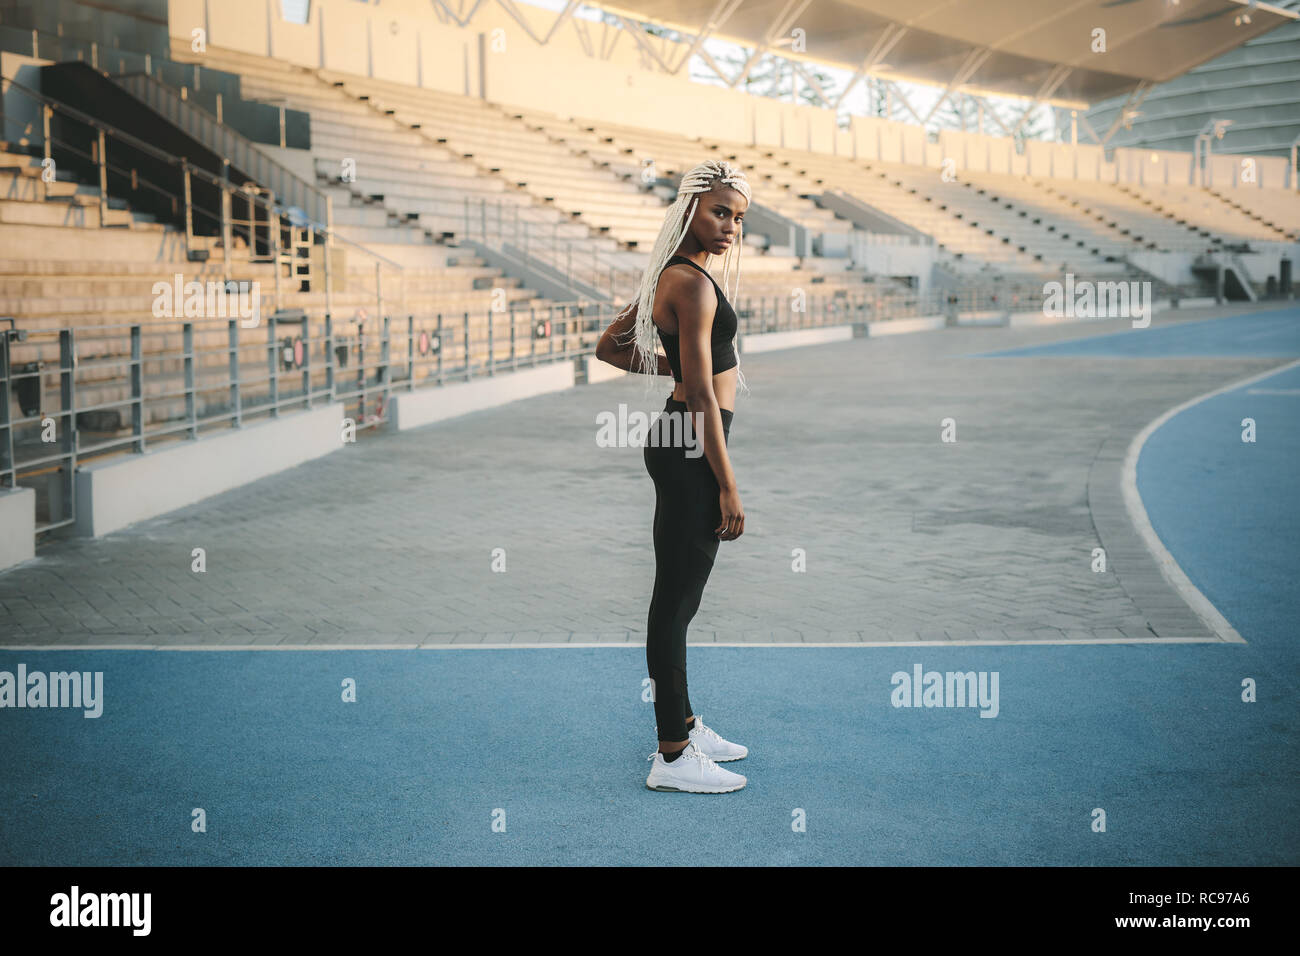 Female athlete standing inside a track and field stadium ready. Female runner getting ready to warm up and workout before running. Stock Photo